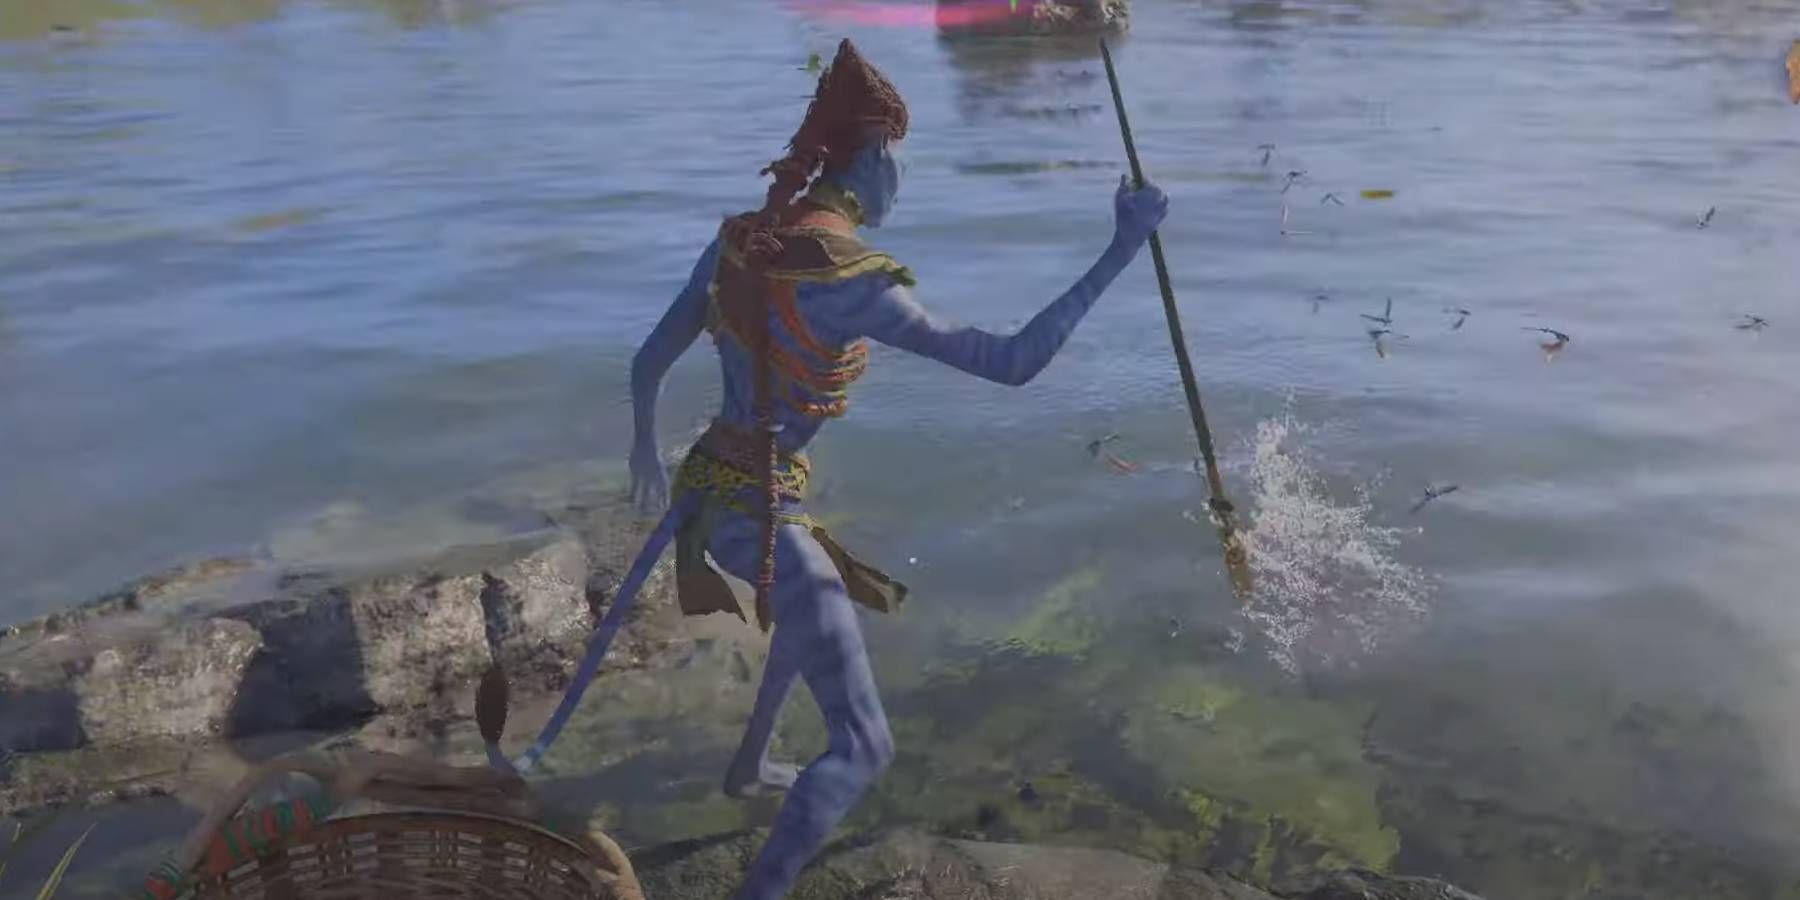 Avatar: Frontiers of Pandora Na'vi Character Fishing with Spear in Water for Food Supplies